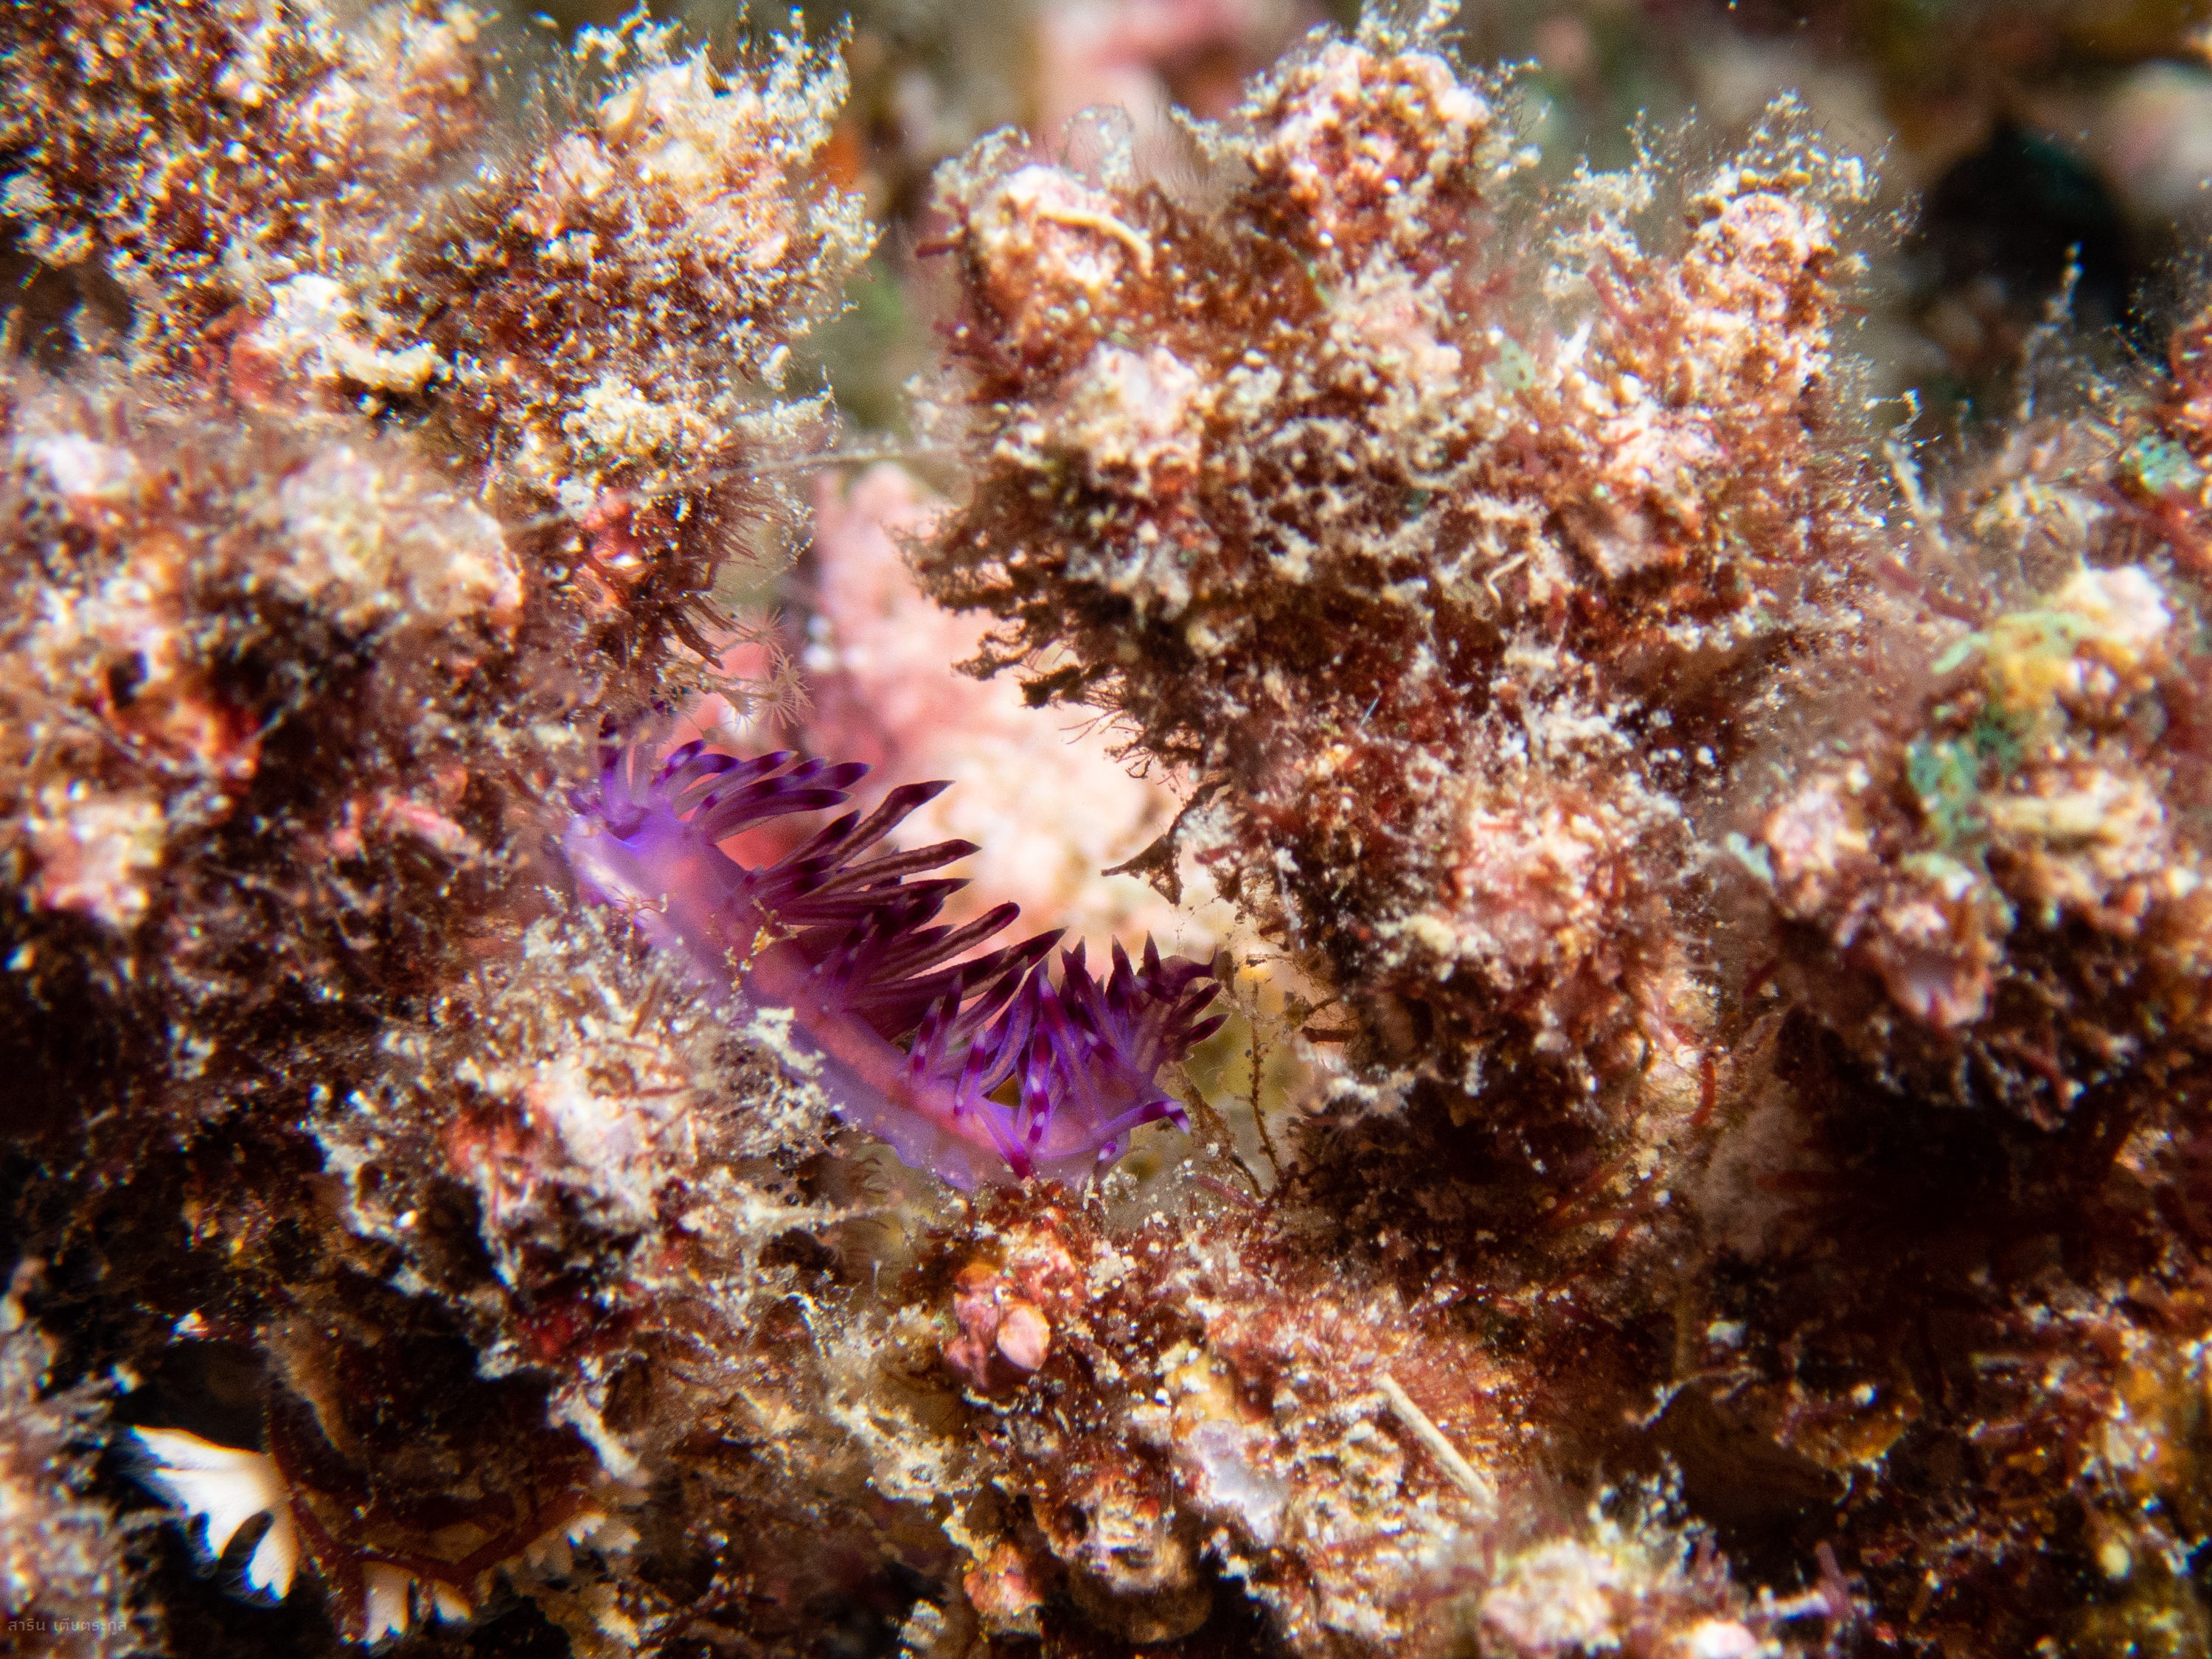 *Flabellina rubrolineata* wedged in coral